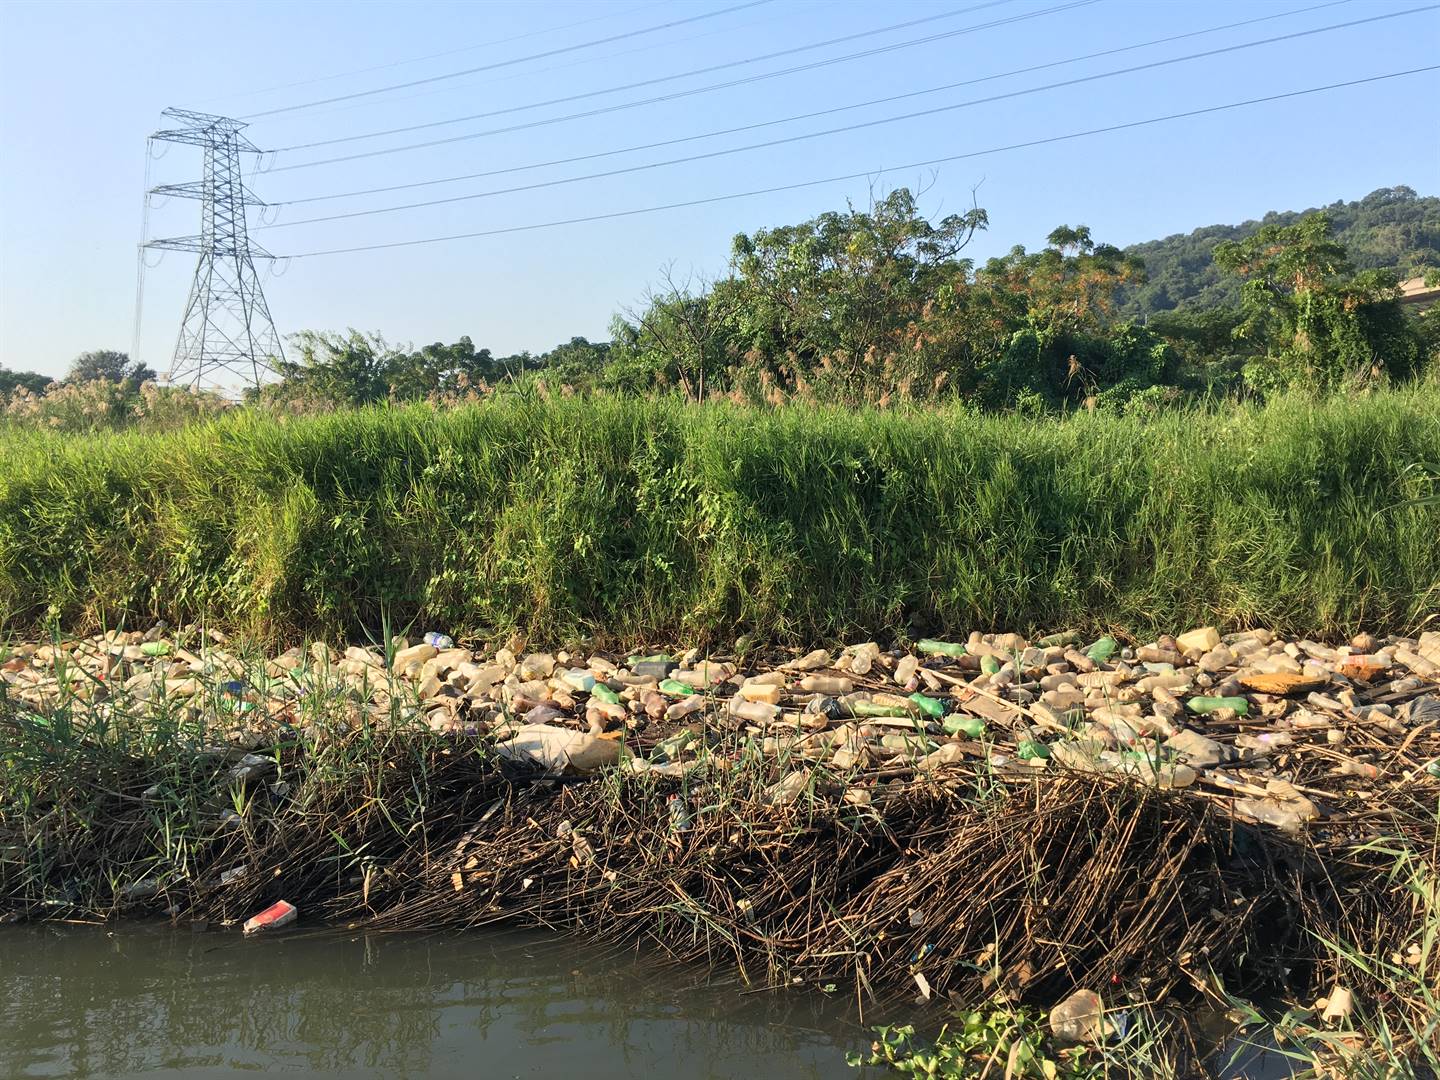 Researchers are trying to find new insight into the seasonal dynamics of plastic waste transported through the Umgeni River system.